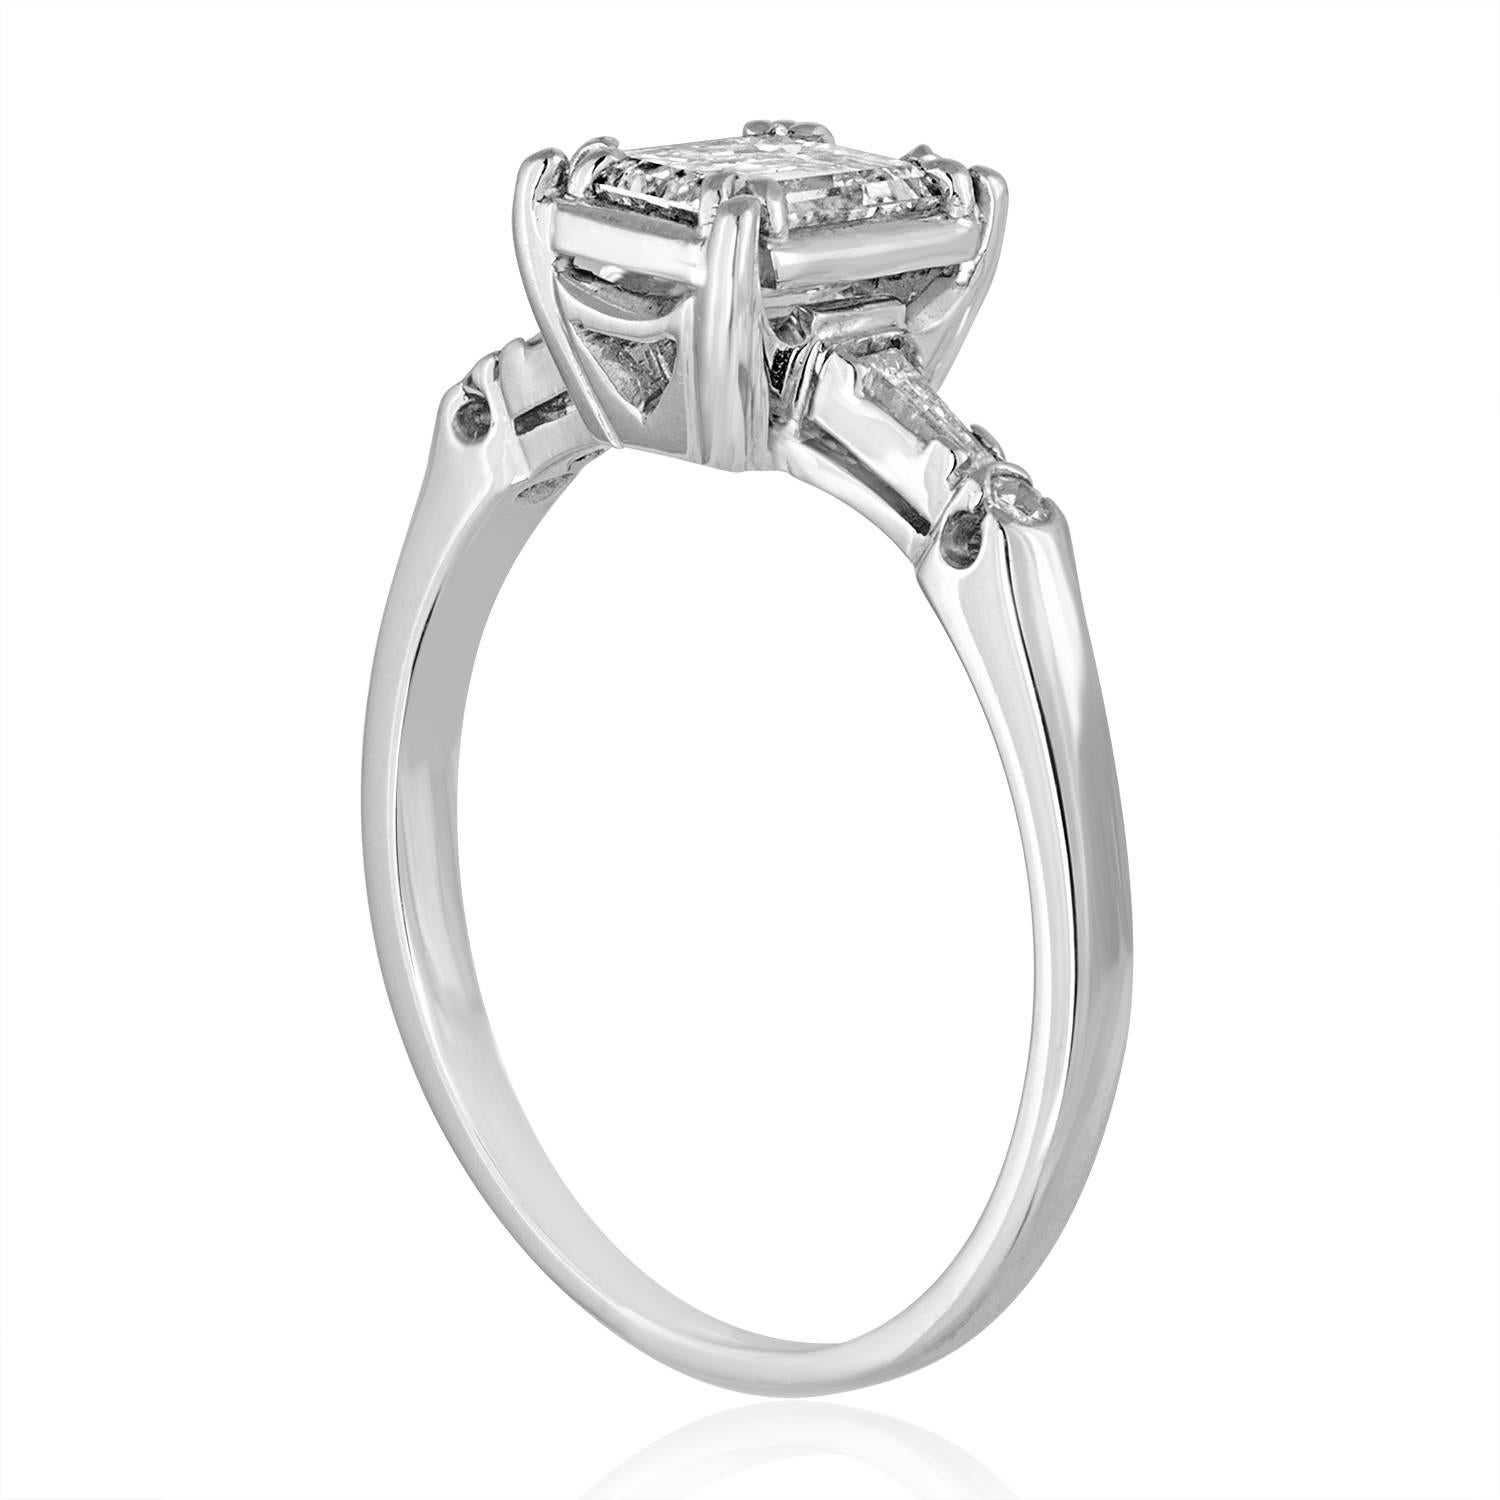 Beautiful & Delicate Engagement Ring.
The ring is Platinum.
The center stone is Emerald Cut 0.71Ct G/H VS2/SI1
On the sides are tapered baguettes and small round diamonds 0.11Ct G/H VS2/SI1
The ring is a size 6.5, sizable.
The ring weighs 3.8